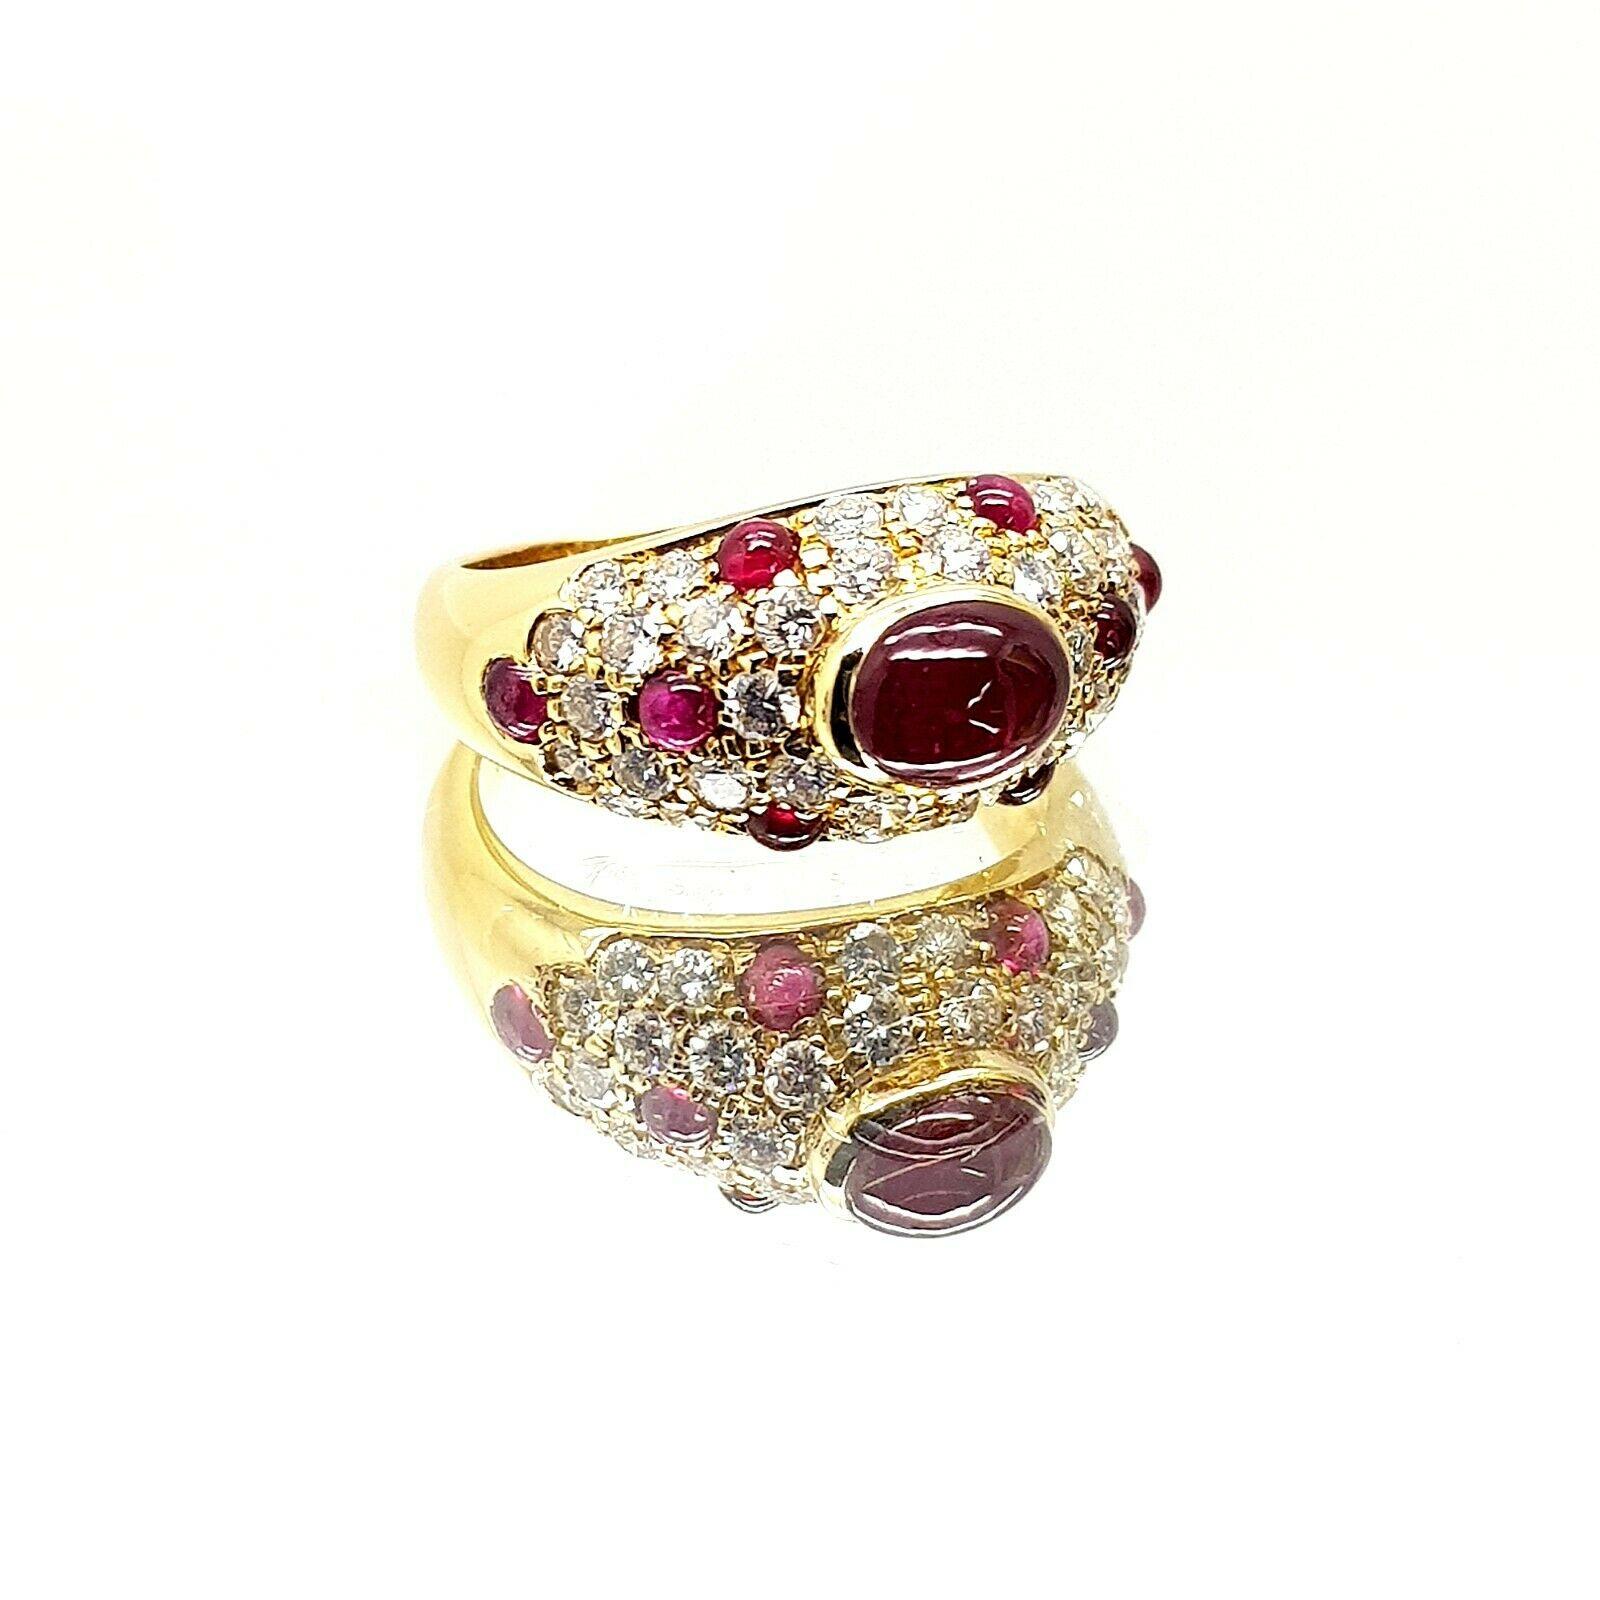  Authentic Cartier vintage cabochon ruby and diamond ring, this ring has 9 pieces of ruby and 37 pieces of round cut diamonds in approximately 0.70 carat total weight, H color and VS1 in clarity. 
Specifications:
    main stone: CABOCHON RUBY 9 pcs
